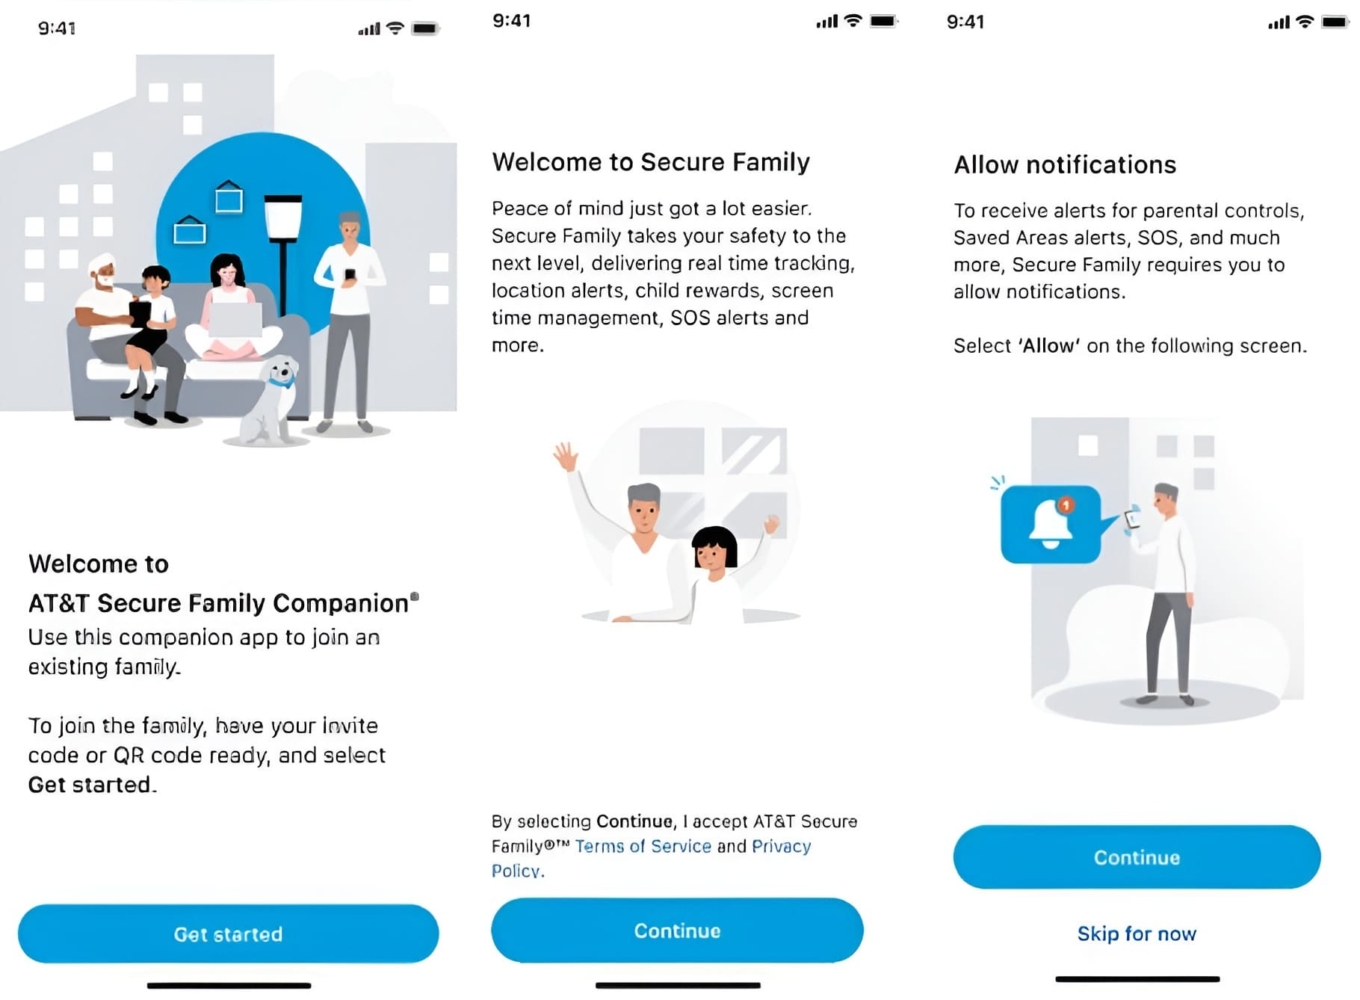 Three screenshots showing how to pair your device with your child's AT&T Secure Family device